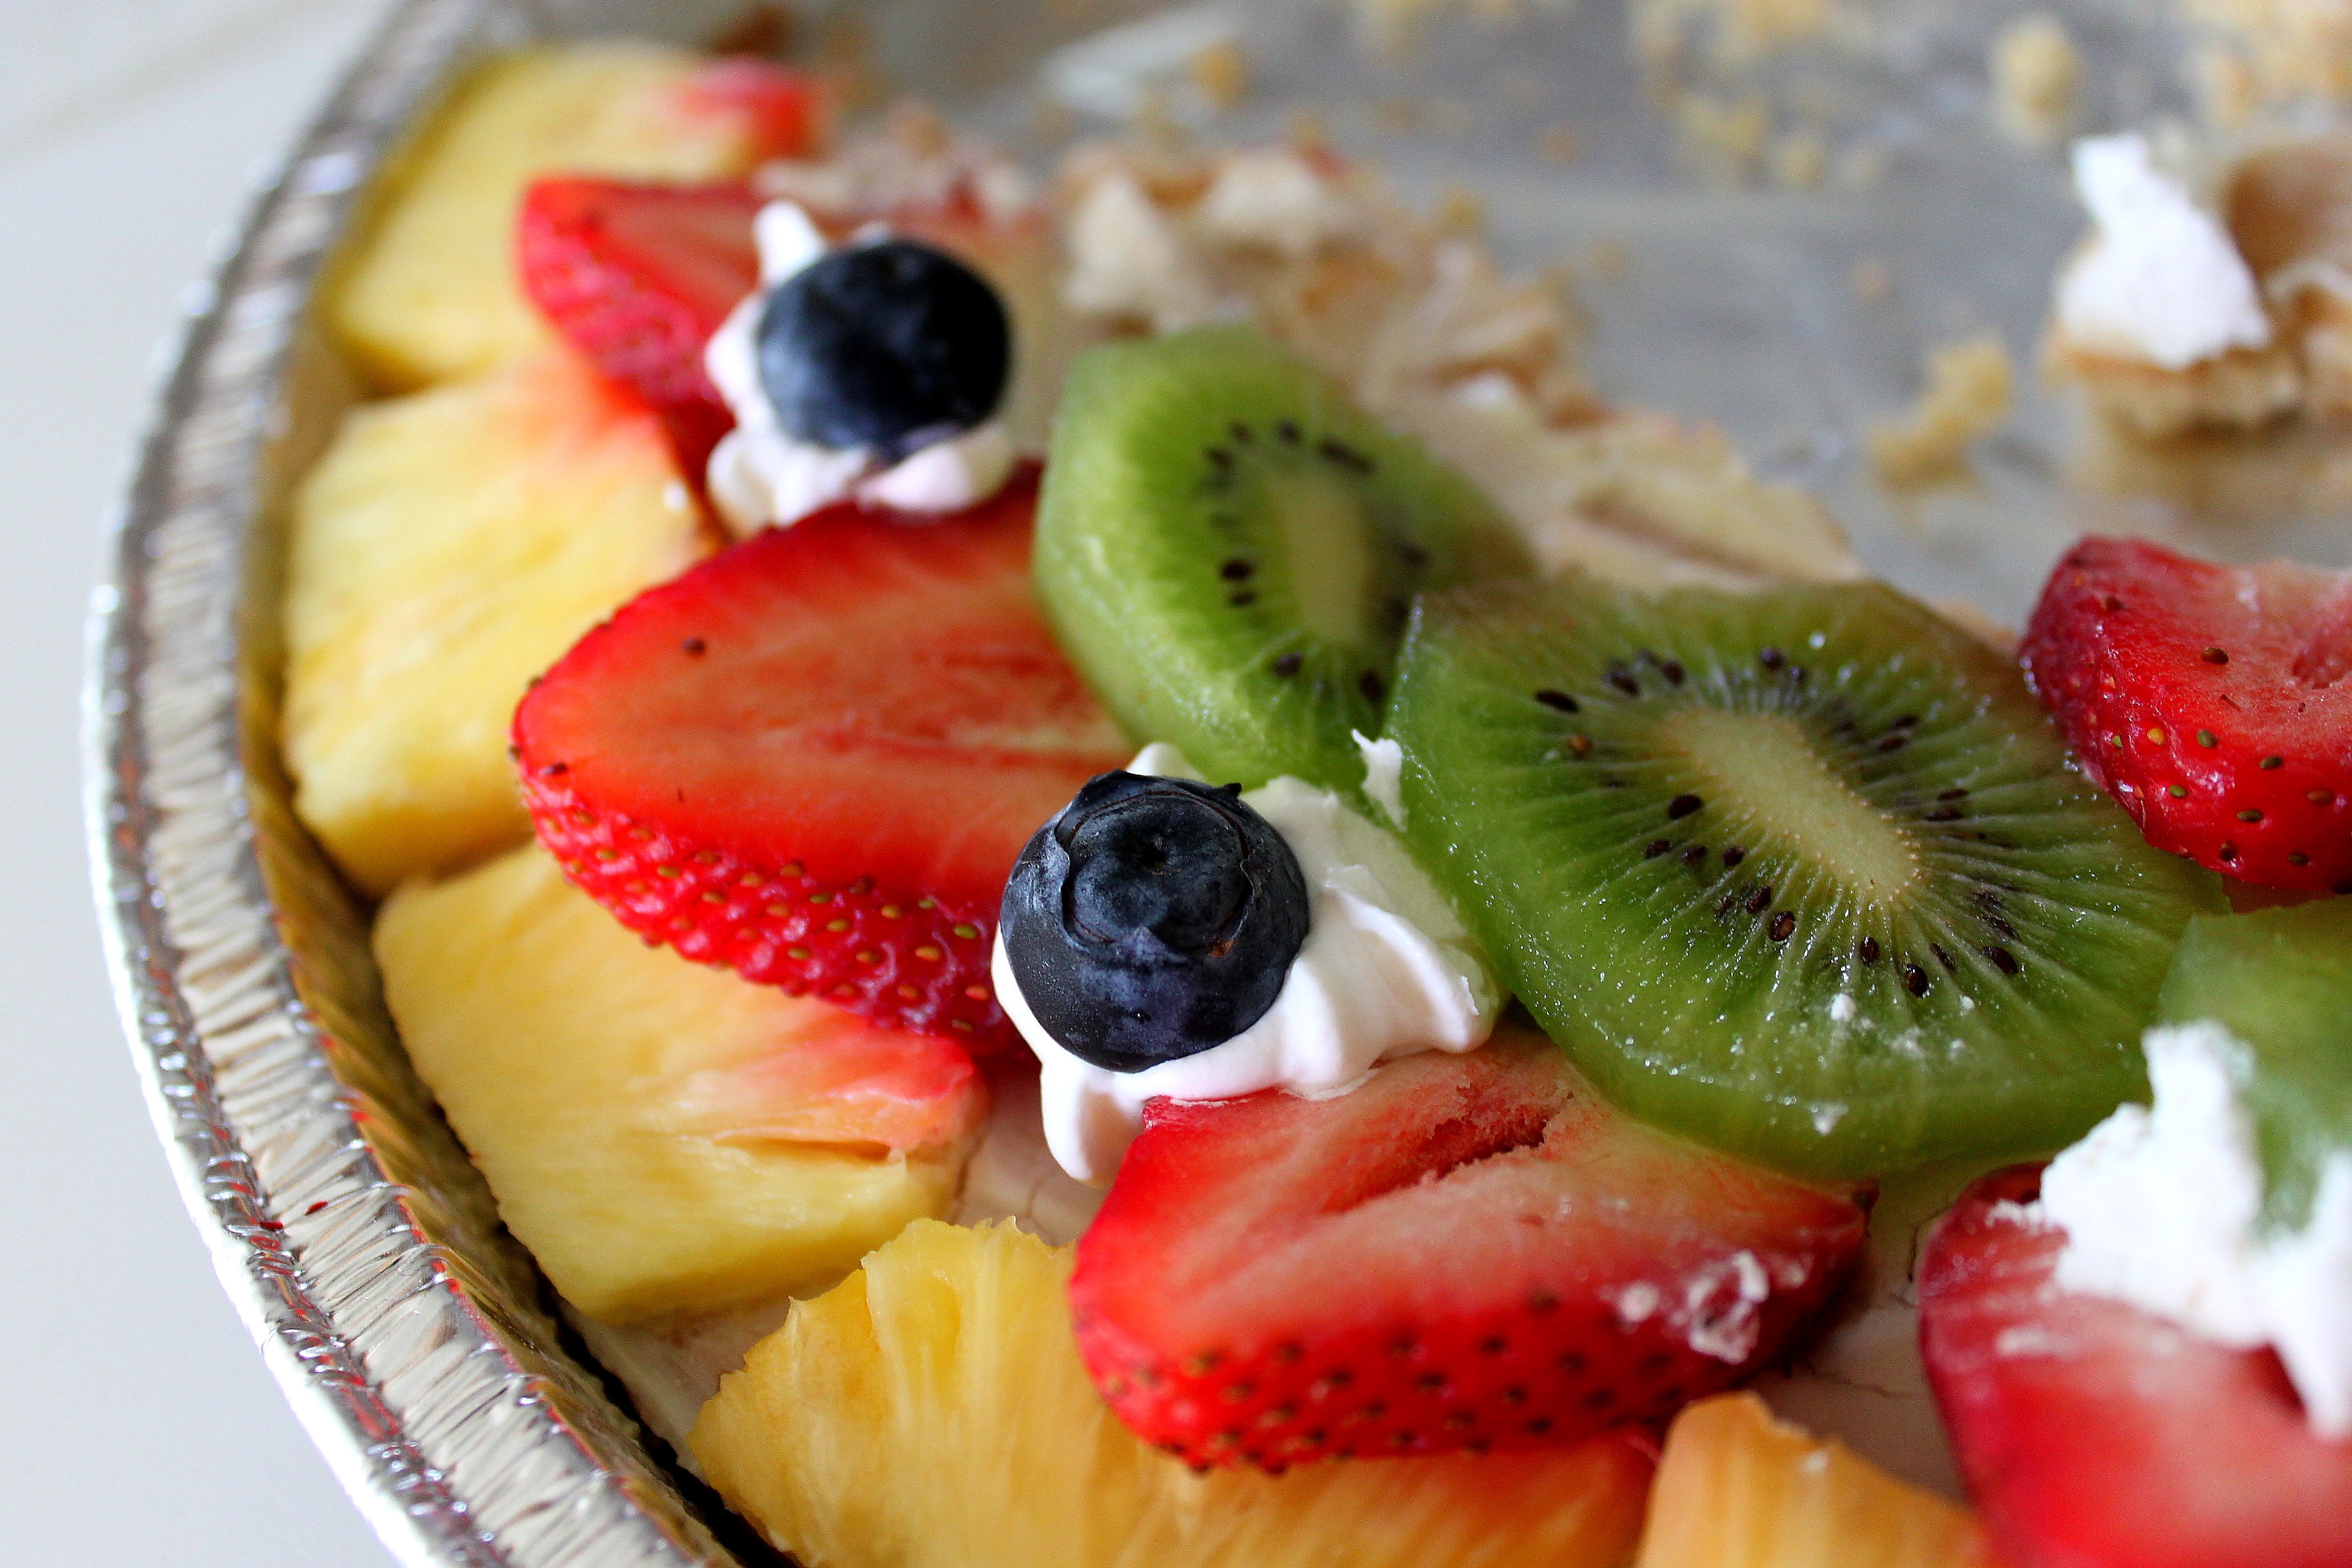 A colorful snack with strawberry, blueberry, pineapple, pie, cream, kiwi, and sugar.